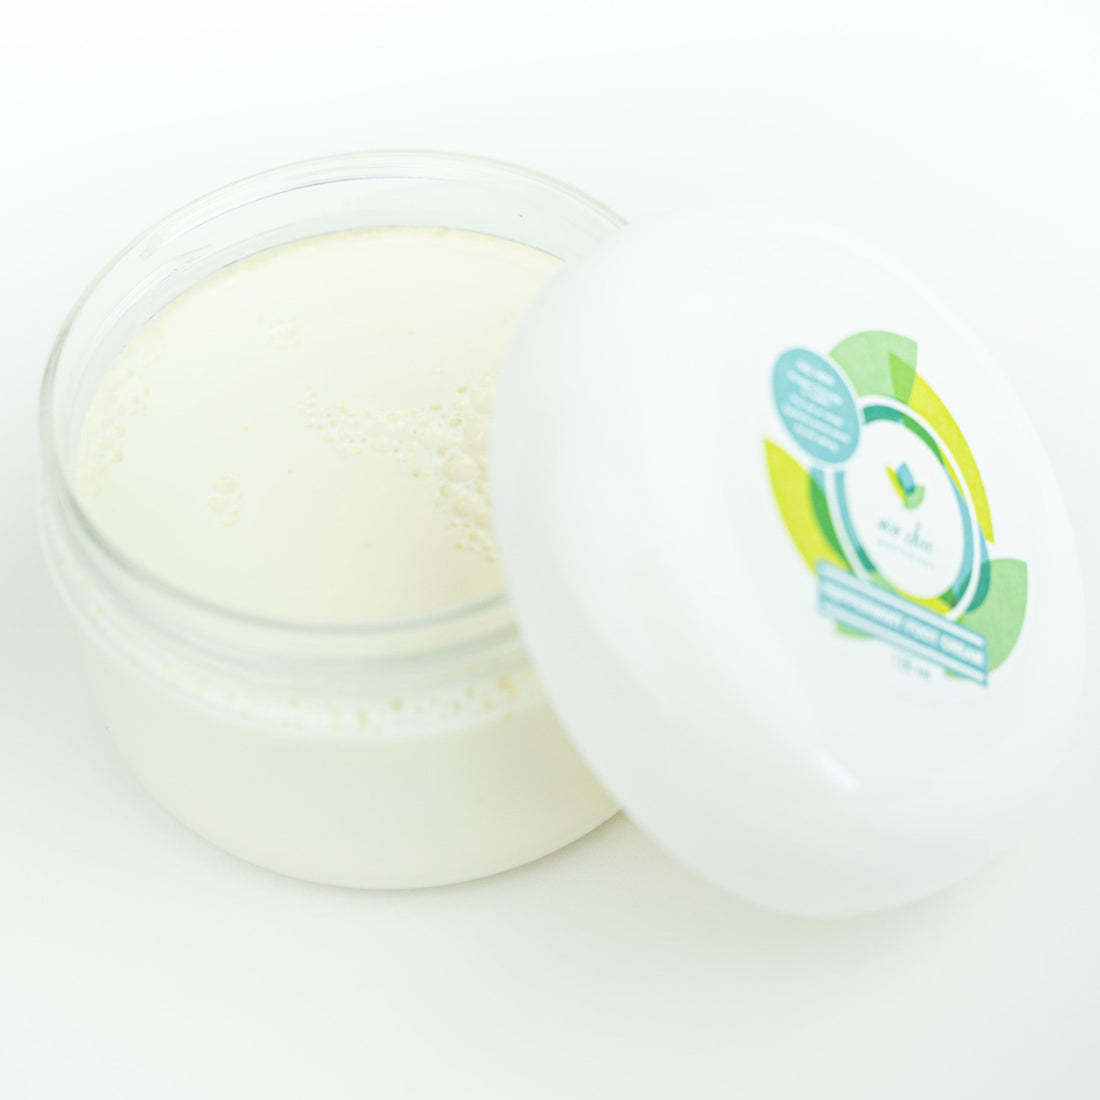 An open jar of non toxic peppermint foot cream sits on a white table